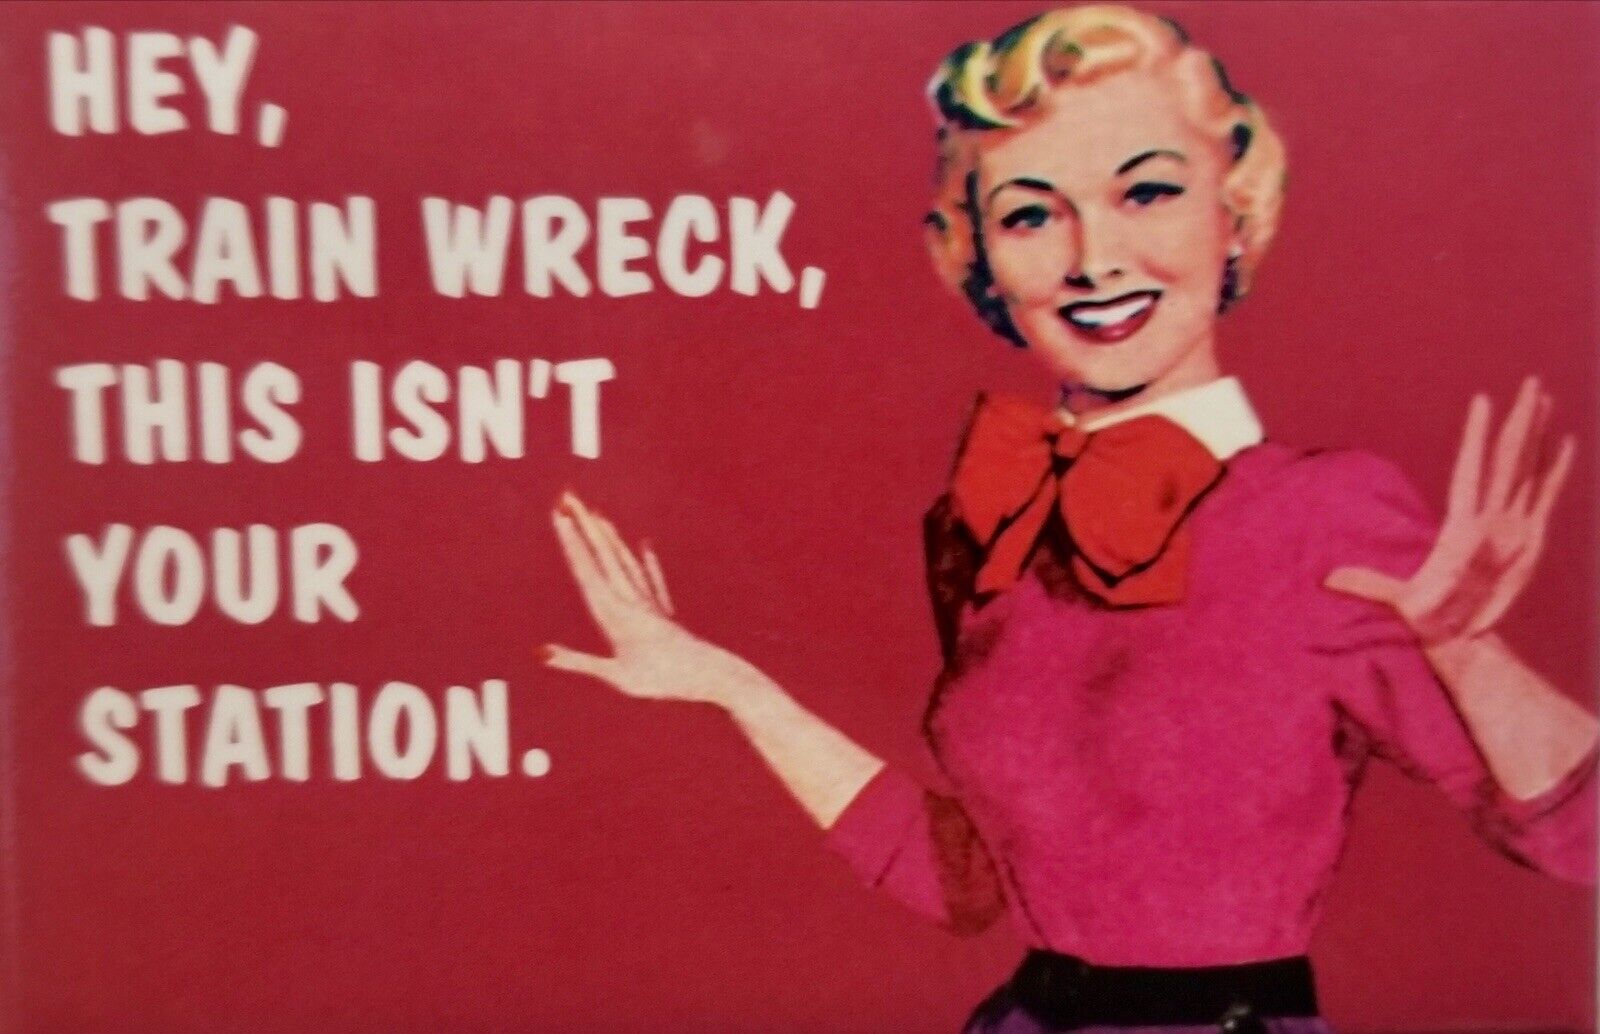 Hey Train Wreck This Isn’t Your Station. All On A 2”x3”Fridge Magnet.